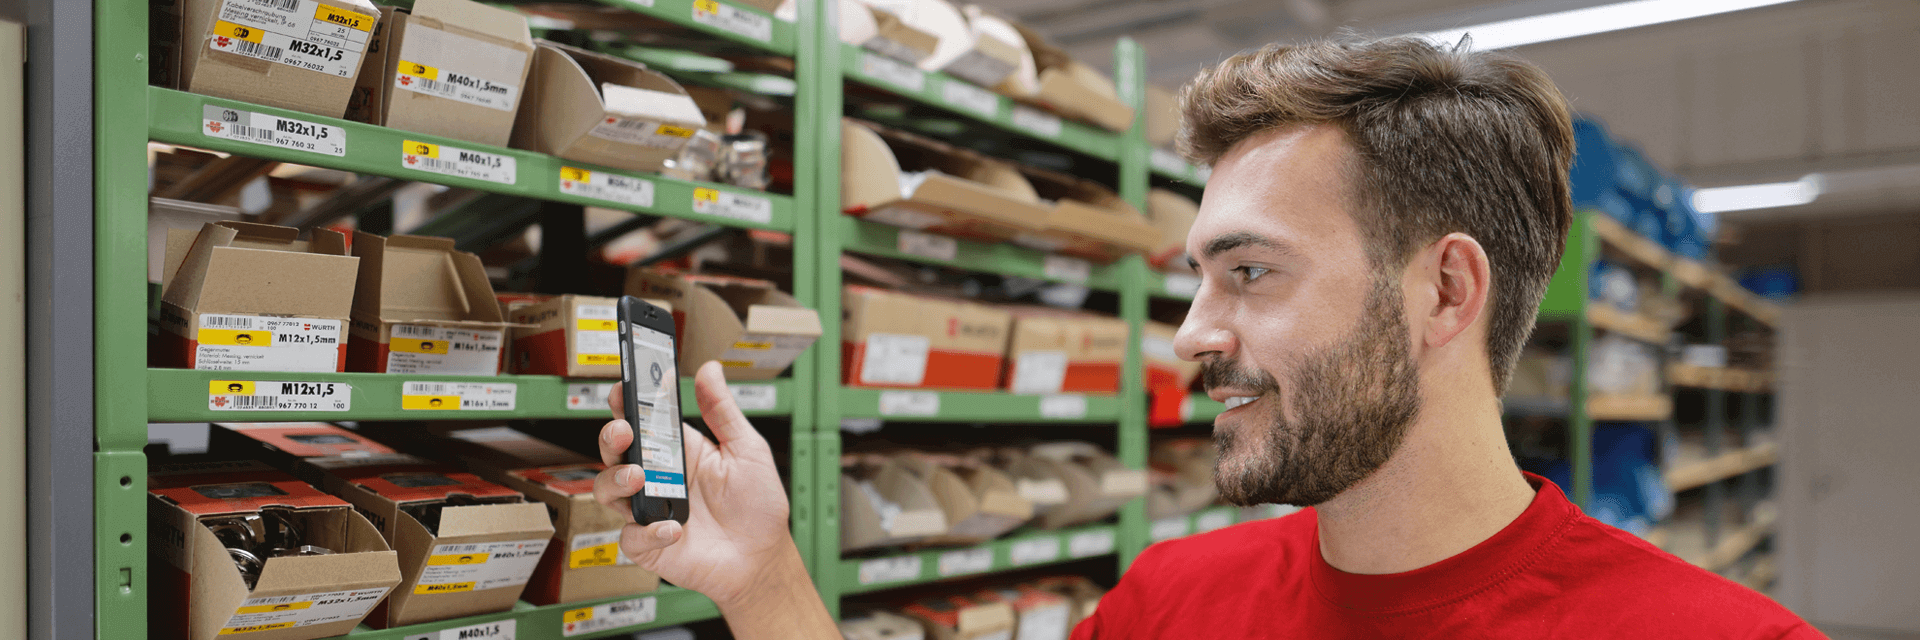 Easily scan Würth product barcodes with our mobile app